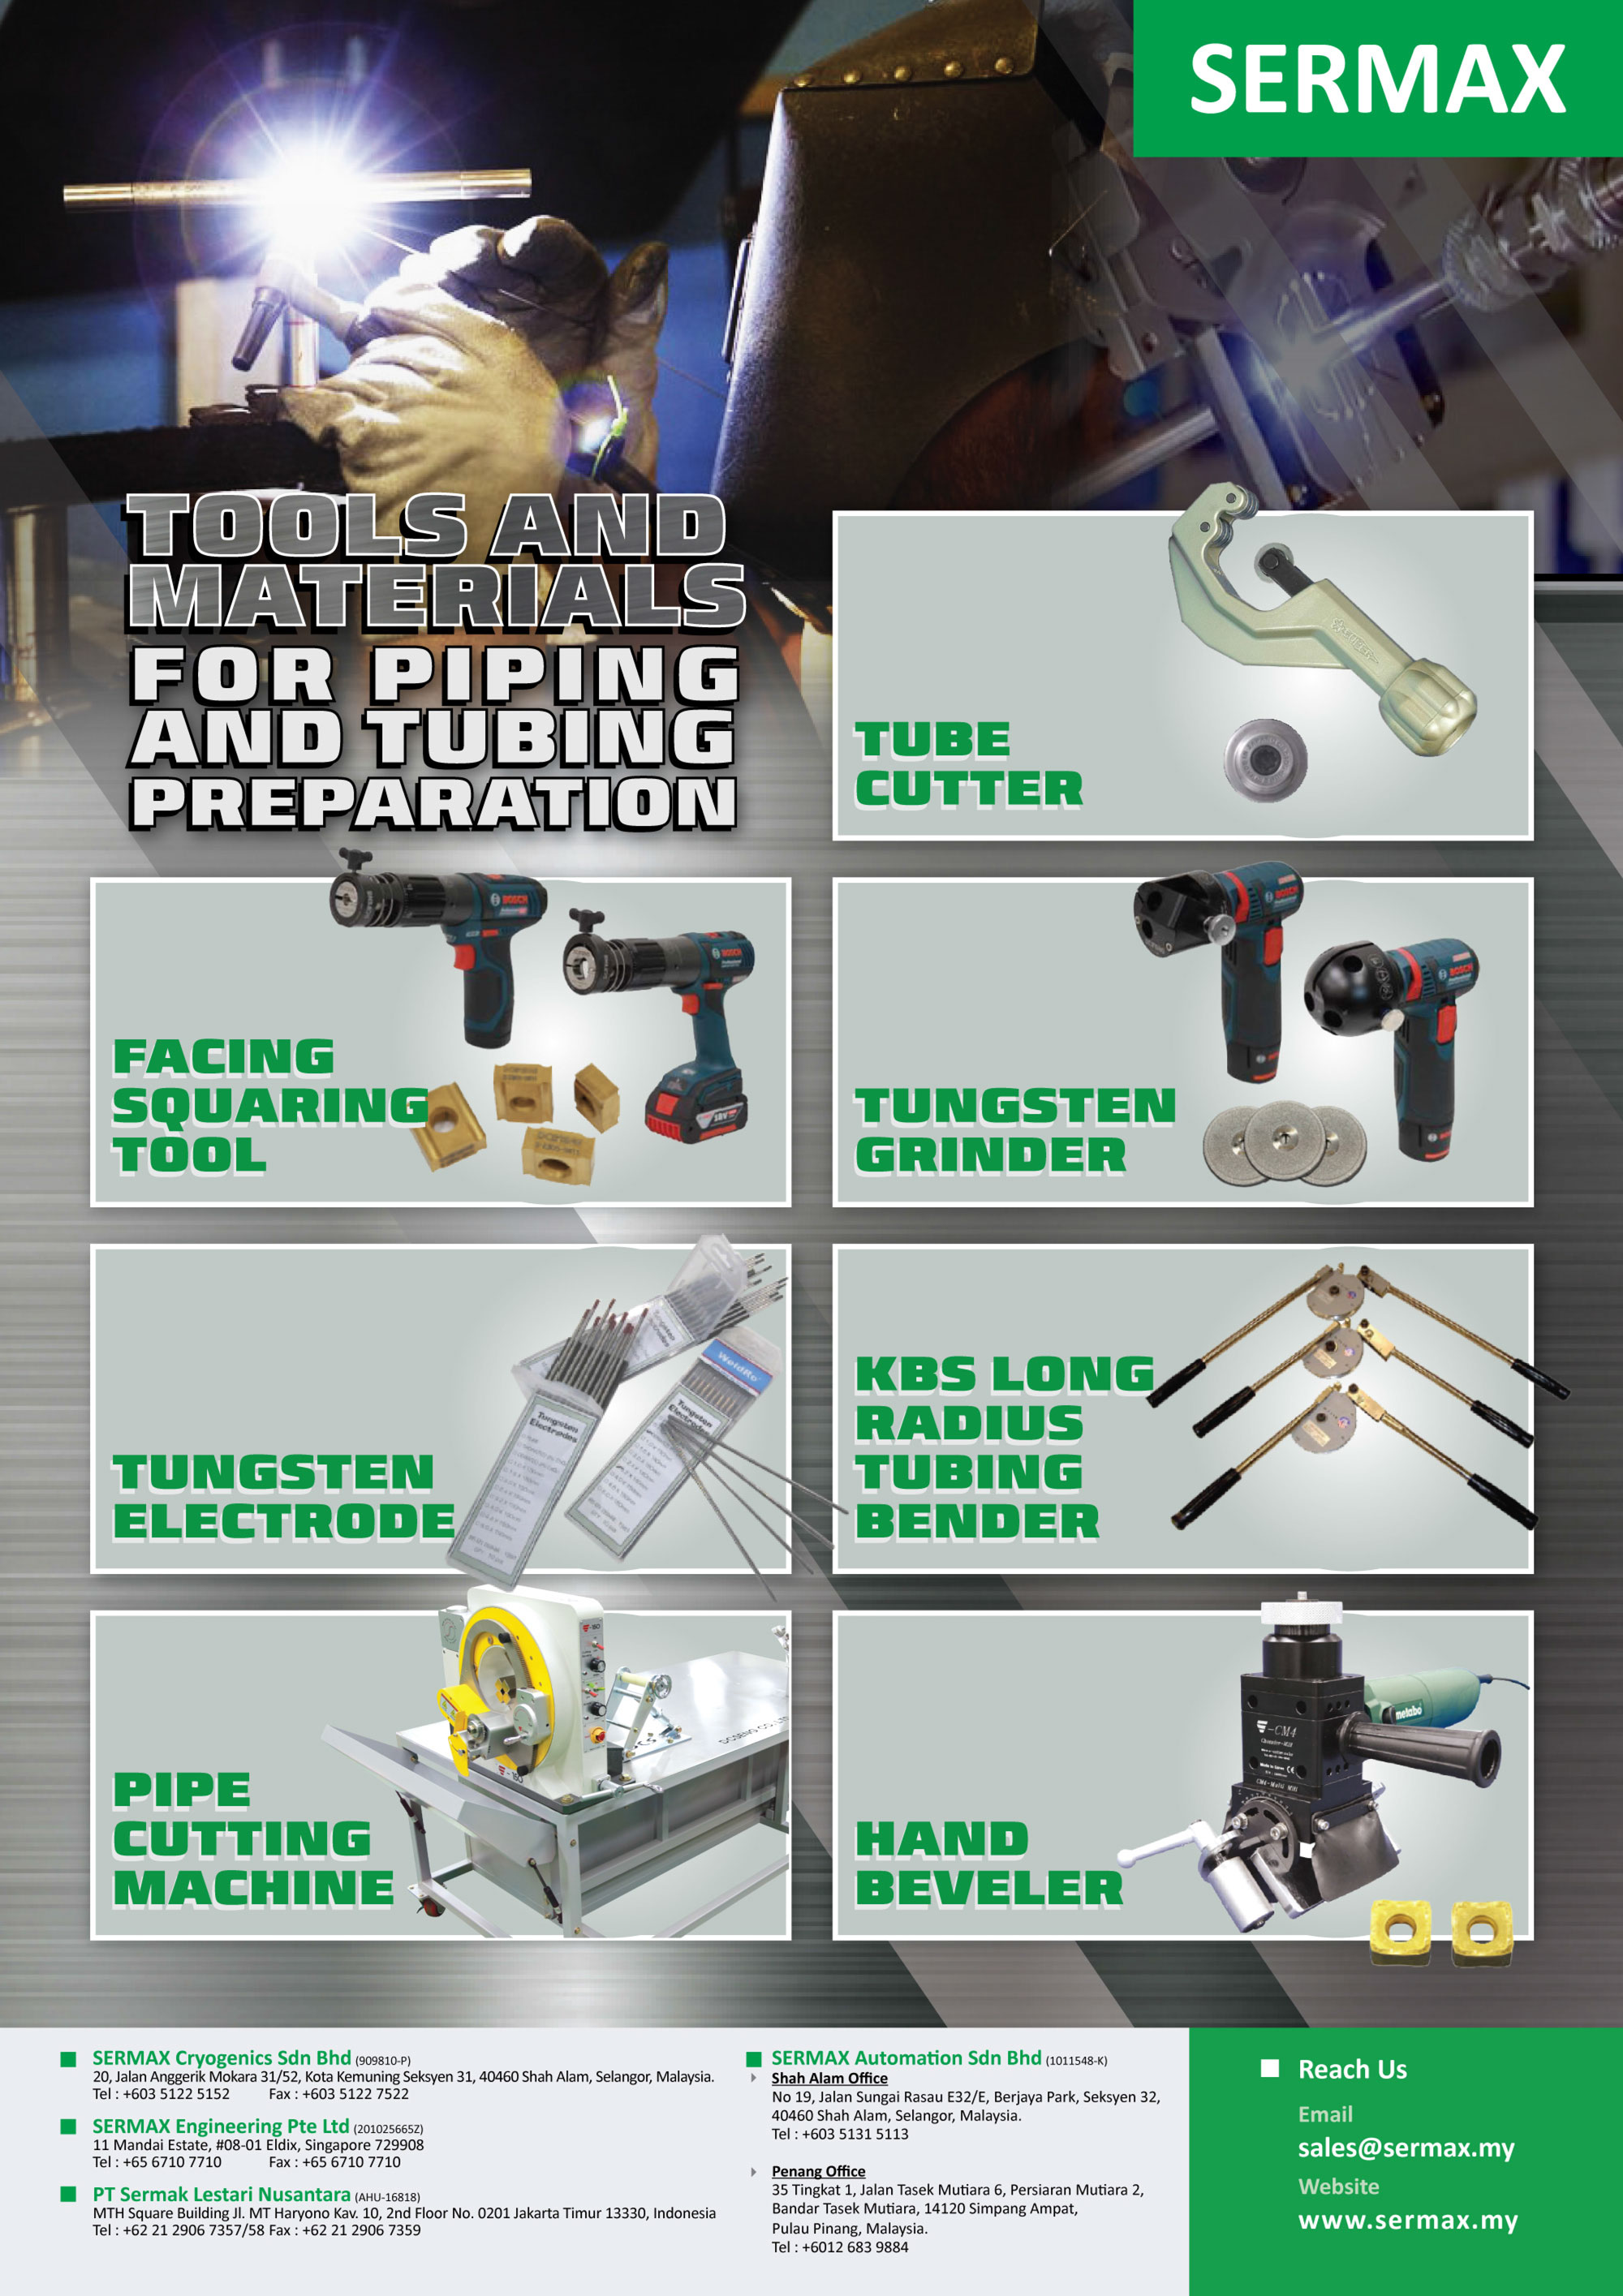 Tools and Materials for piping and tubing preparation - Sermax would like to inform that we do have Tools and Materials for piping and tubing preparation to suit your need.